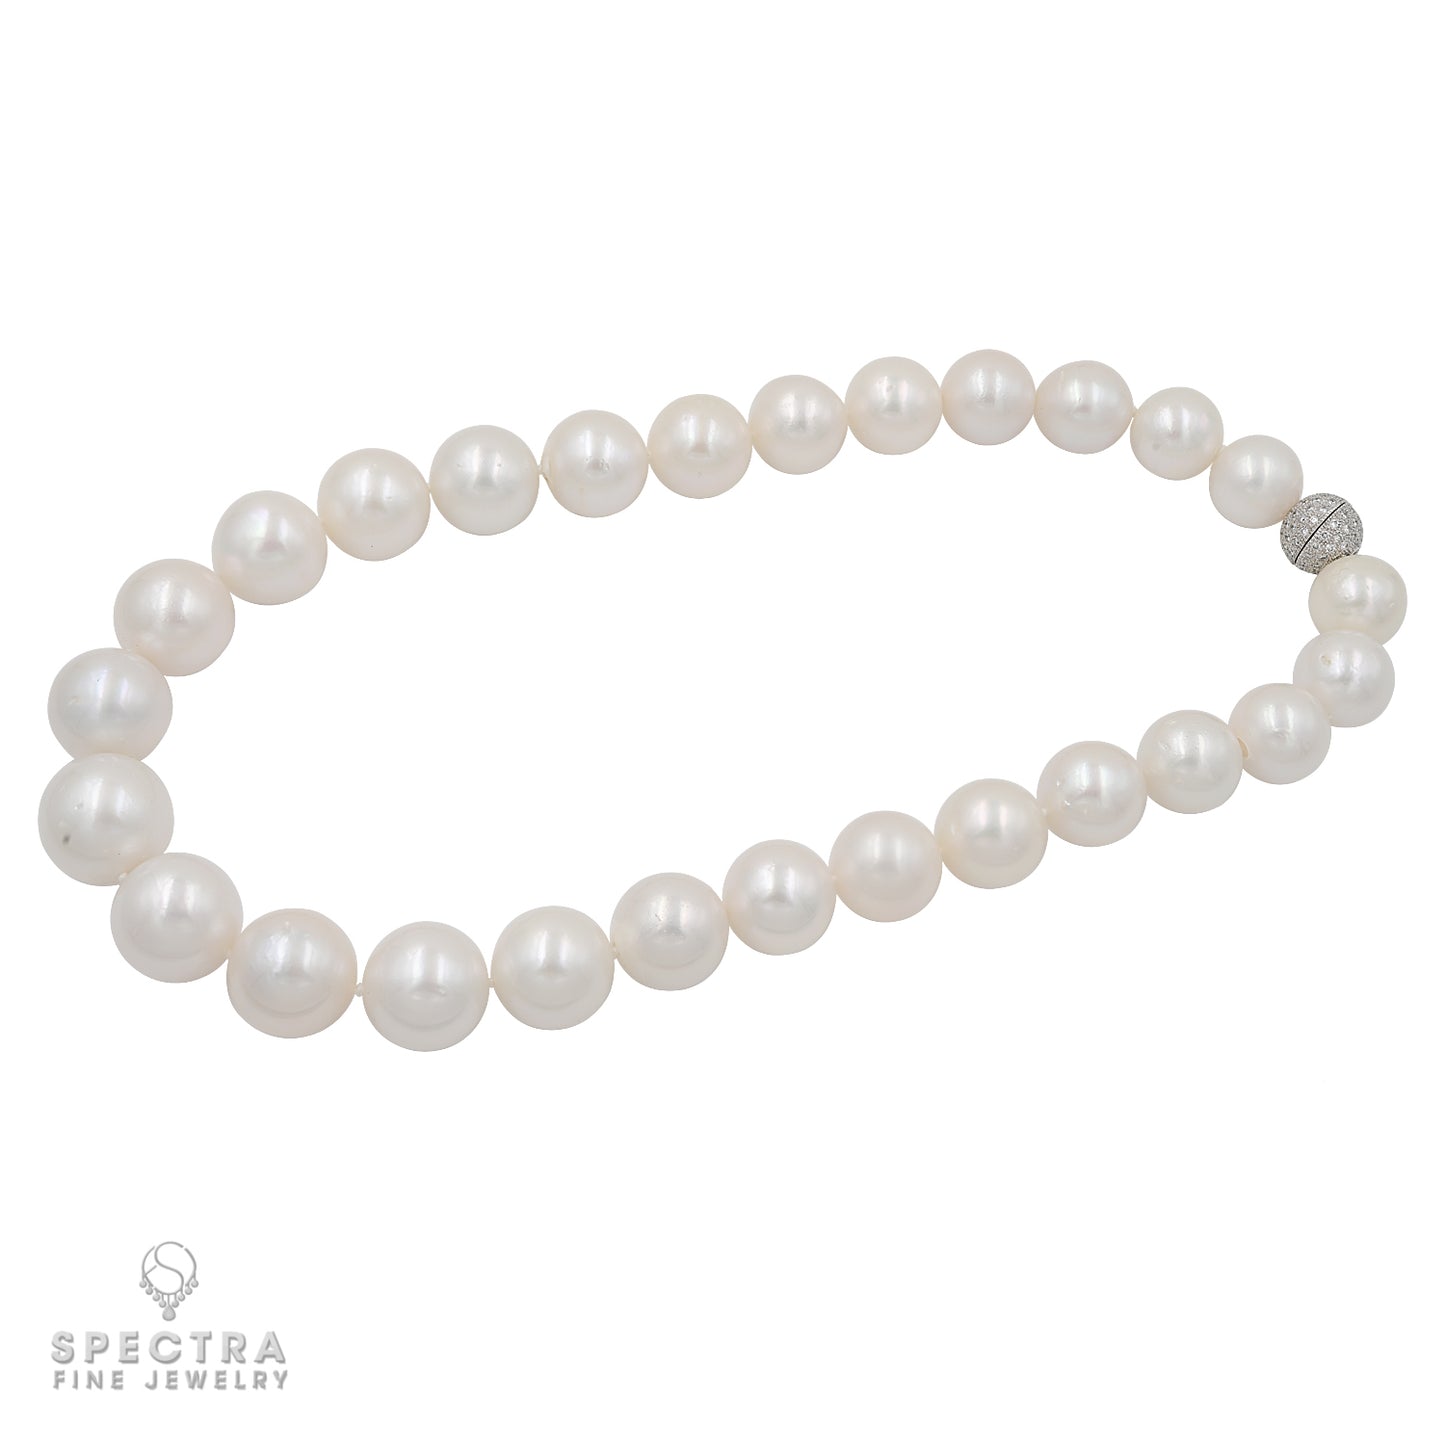 27 South Sea Pearls Necklace: in White Gold and Diamonds